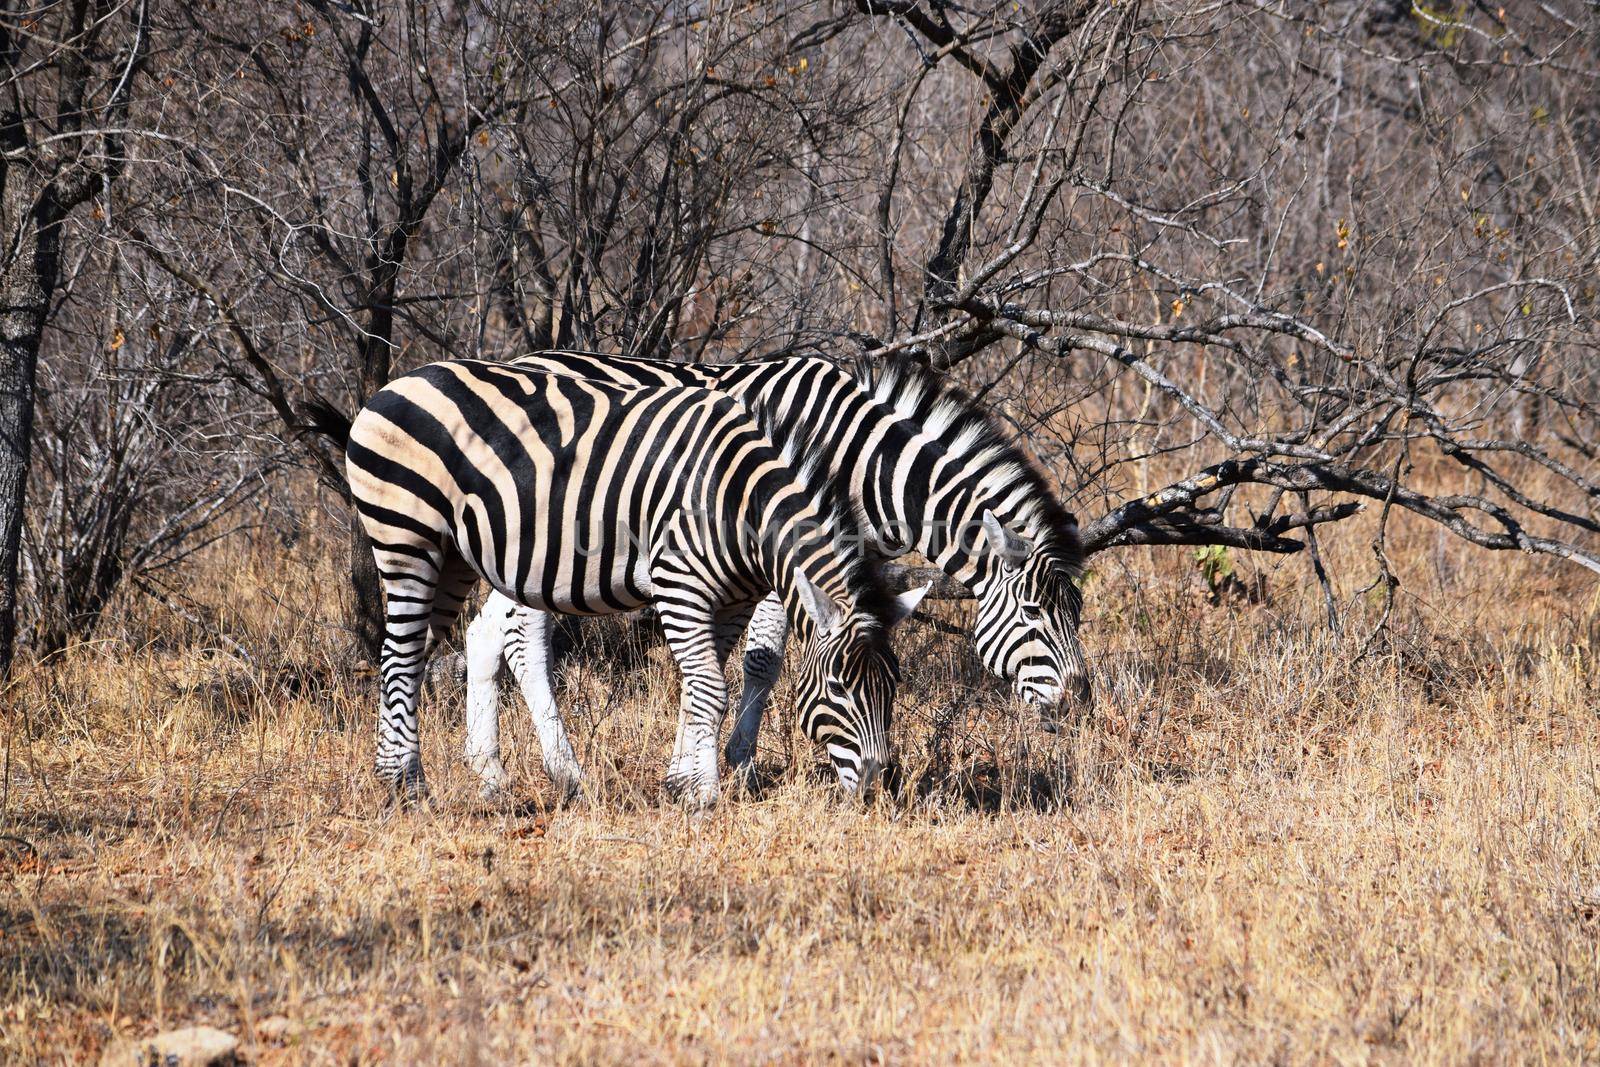 Small group of zebras grazing in Kruger National Park, South Africa